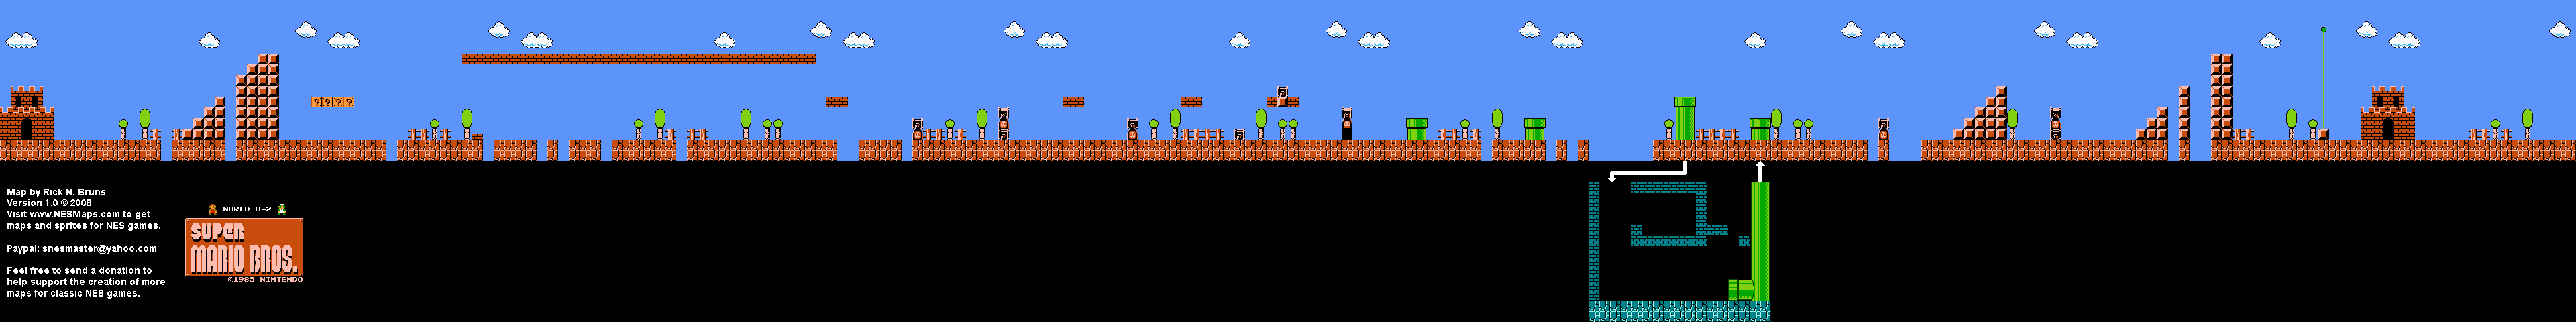 Super Mario Brothers - World 8-2 Nintendo NES Background Only Map